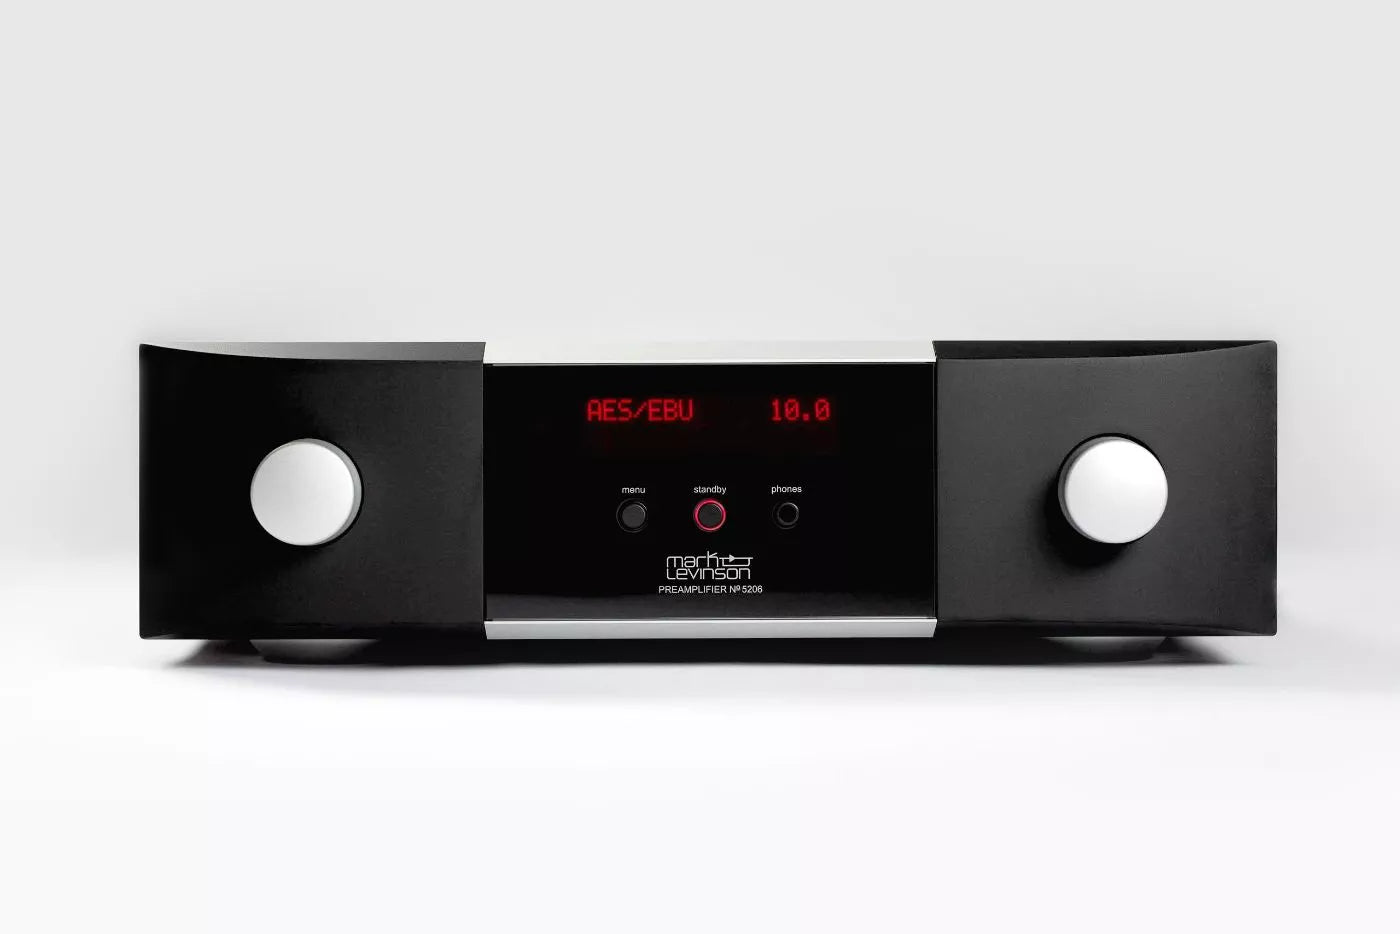 Experience the inner details and maximum dynamics of music with the № 5206. This class-A preamplifier serves as the hub of your entire audio system. By preserving digital and analog audio signals, the № 5206 delivers the purest possible signal, allowing you to hear the full potential of your music. 